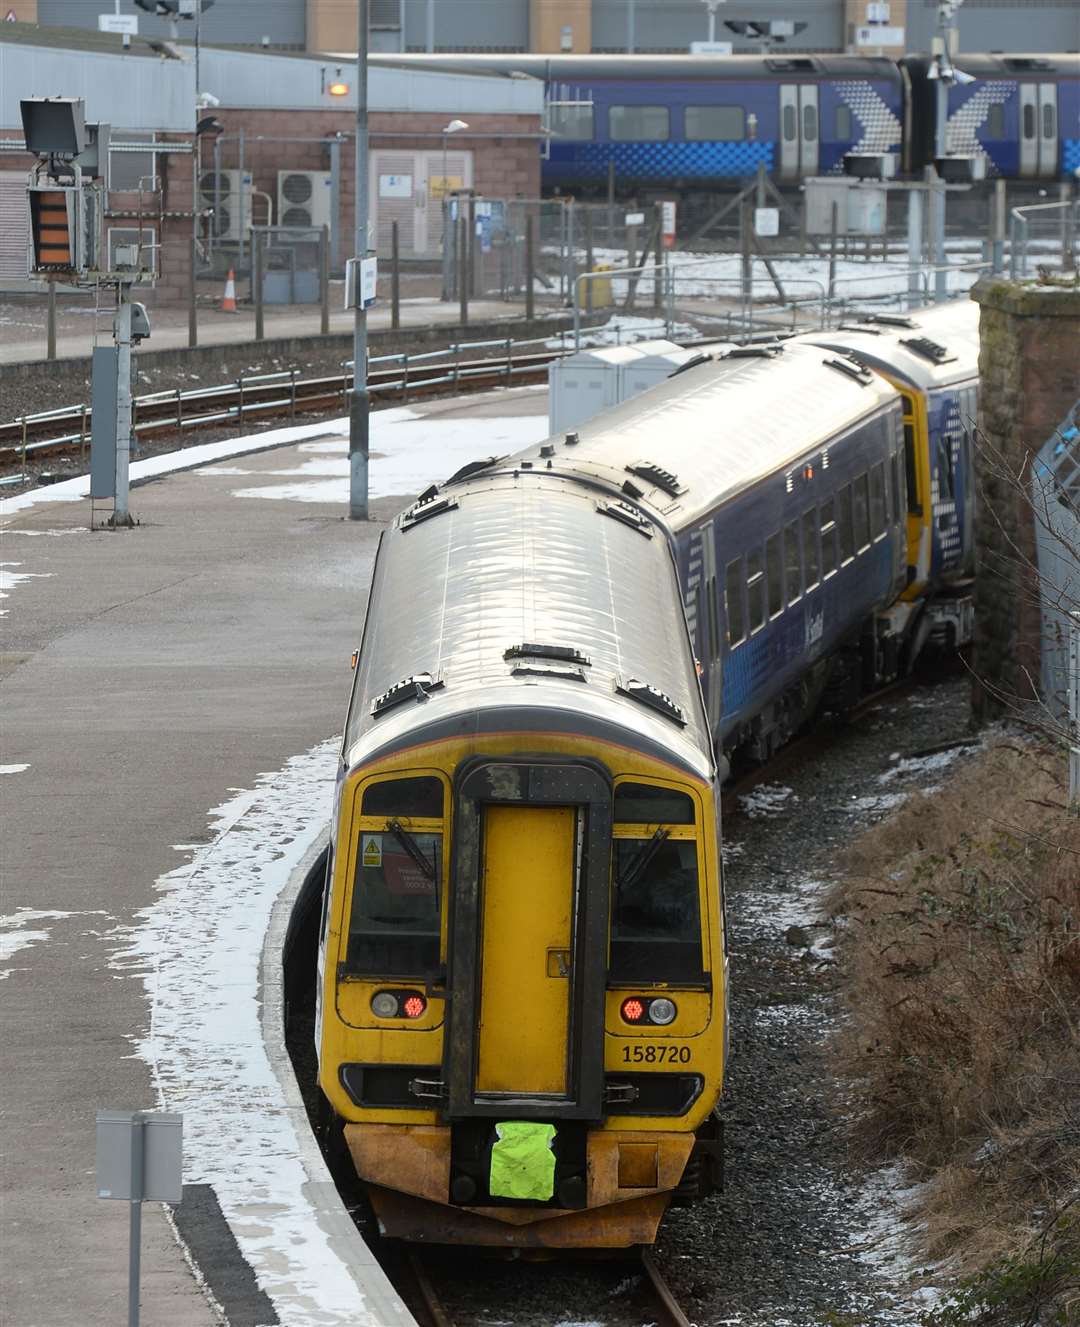 Direct services from Perth to Inverness are suspended until Sunday.